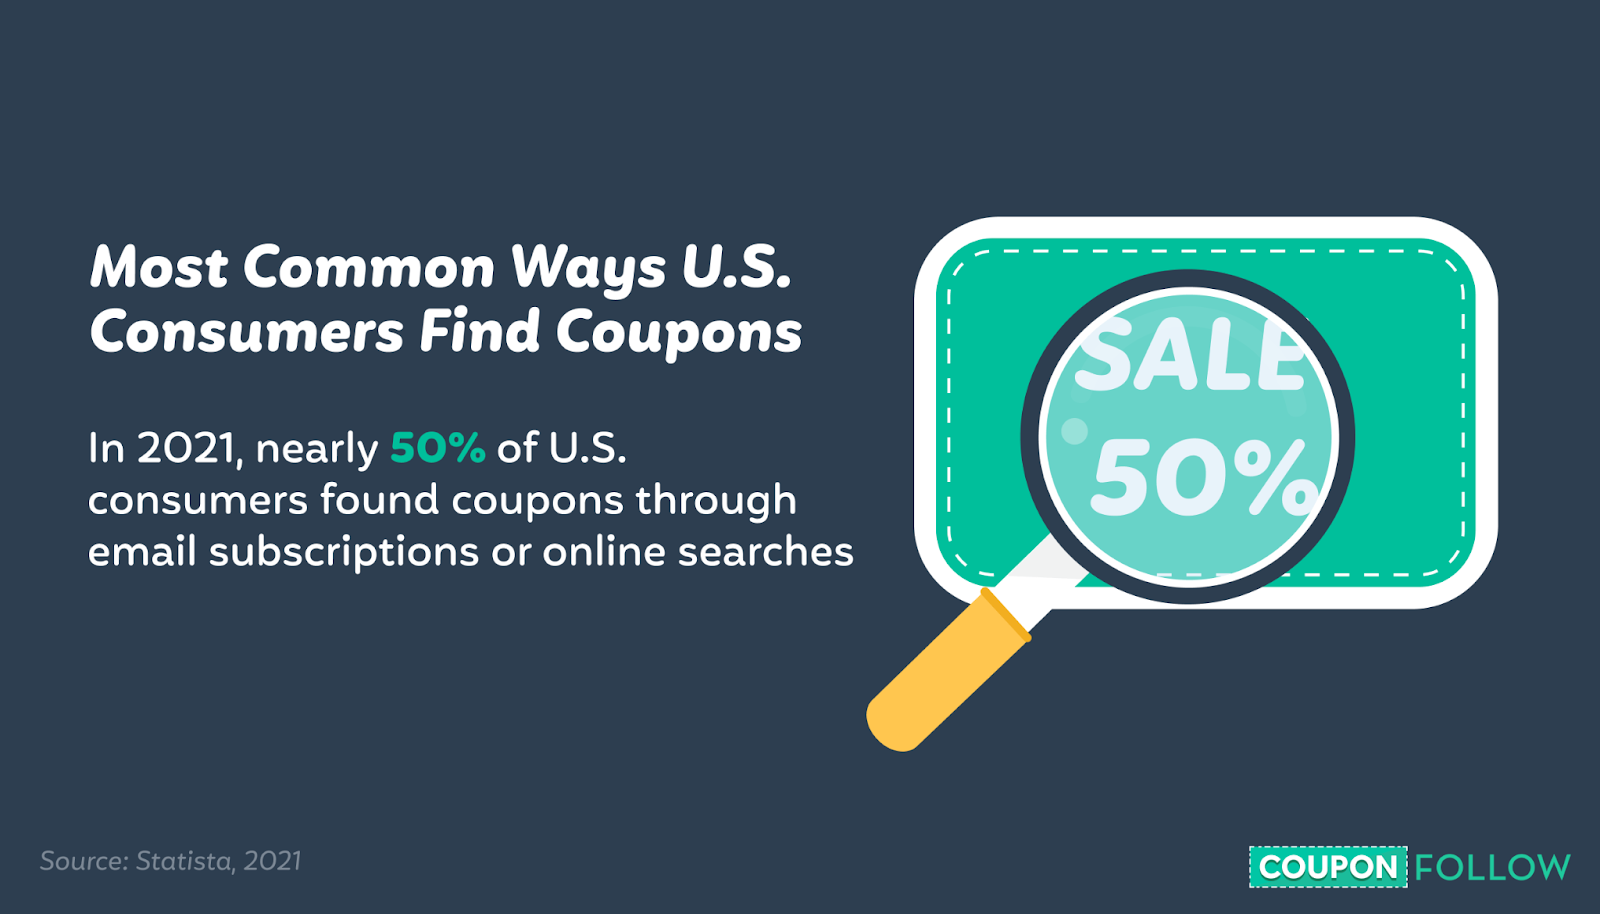 image showing the most common ways U.S. consumers found coupons in 2021